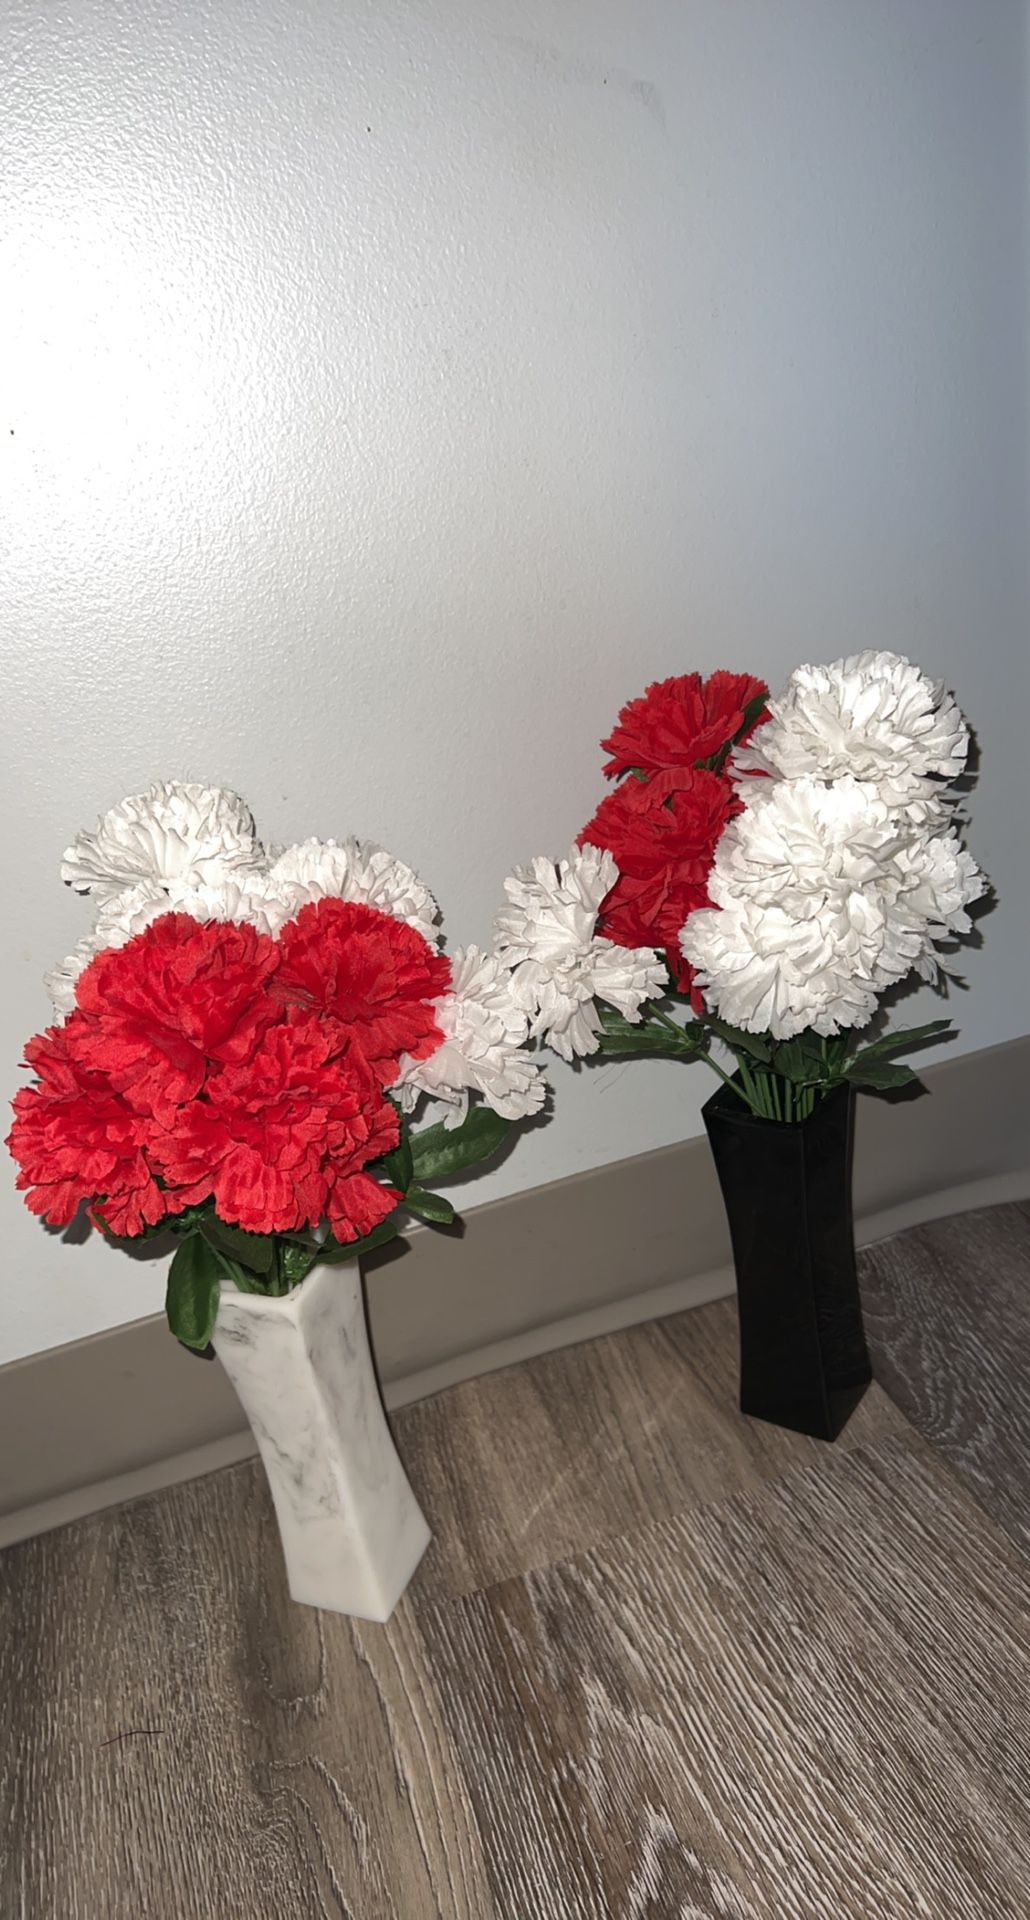 Artificial flower with vase